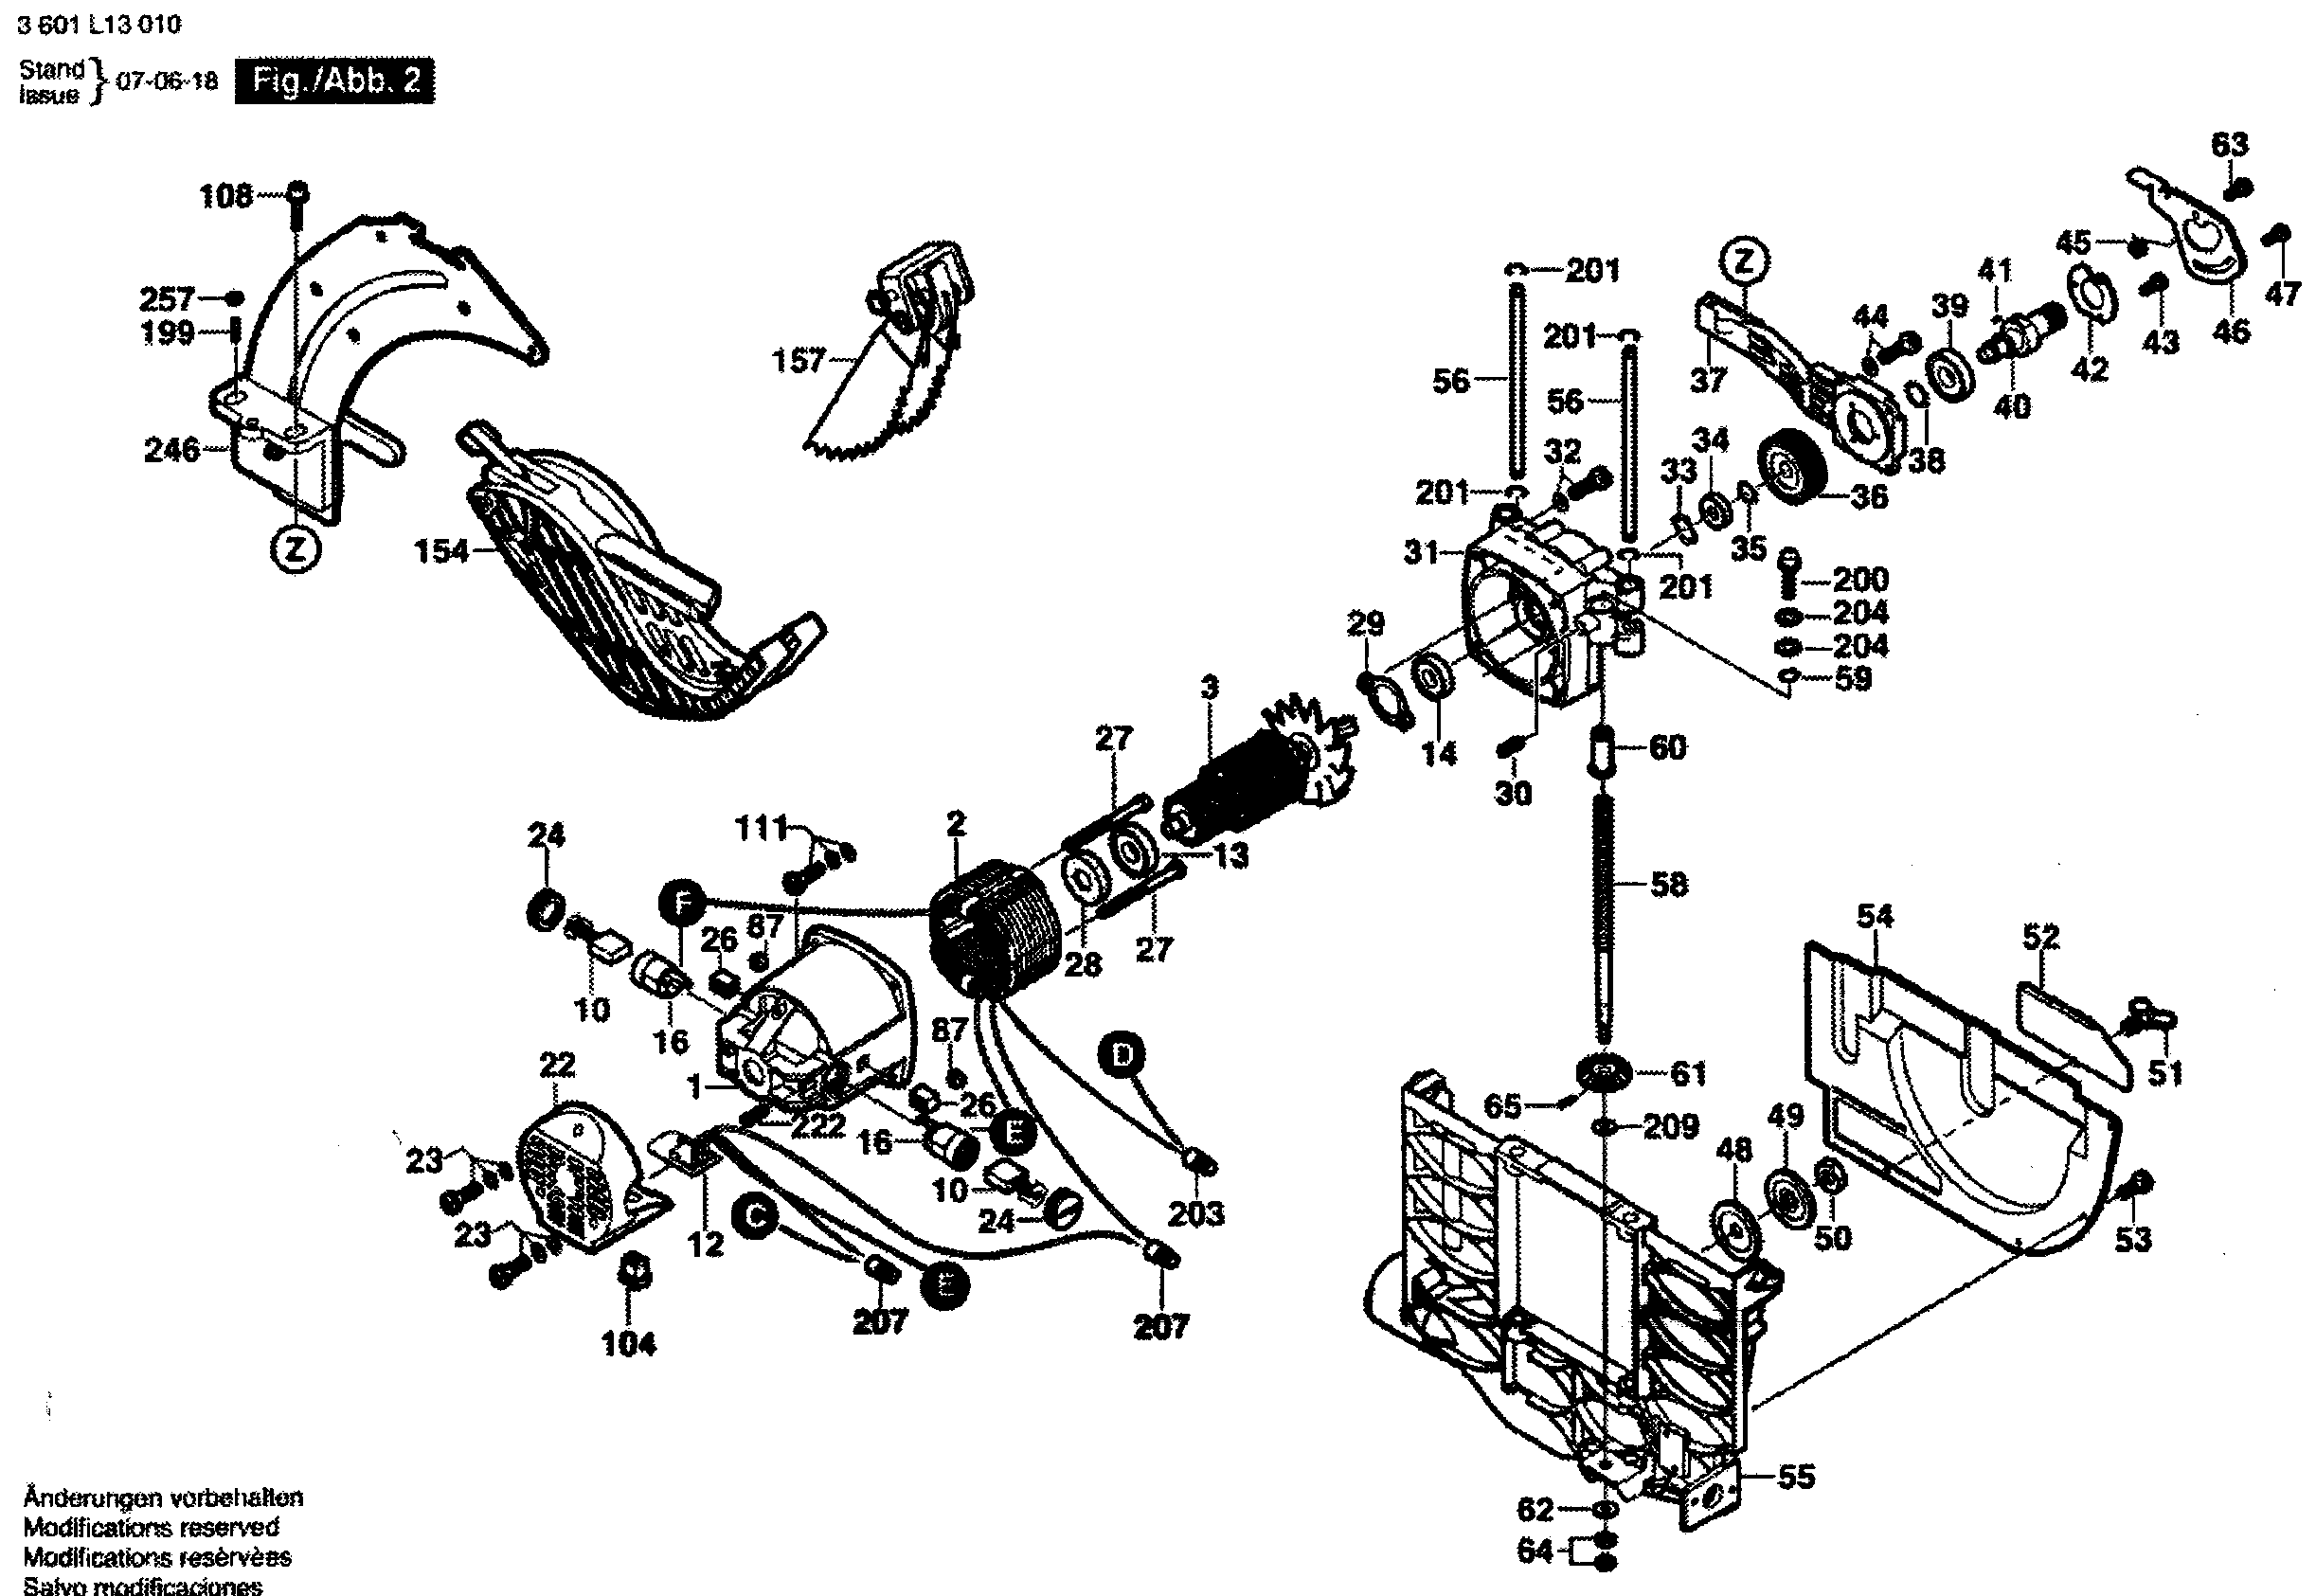 Noministnow Bosch 4100 Table Saw Parts Diagram